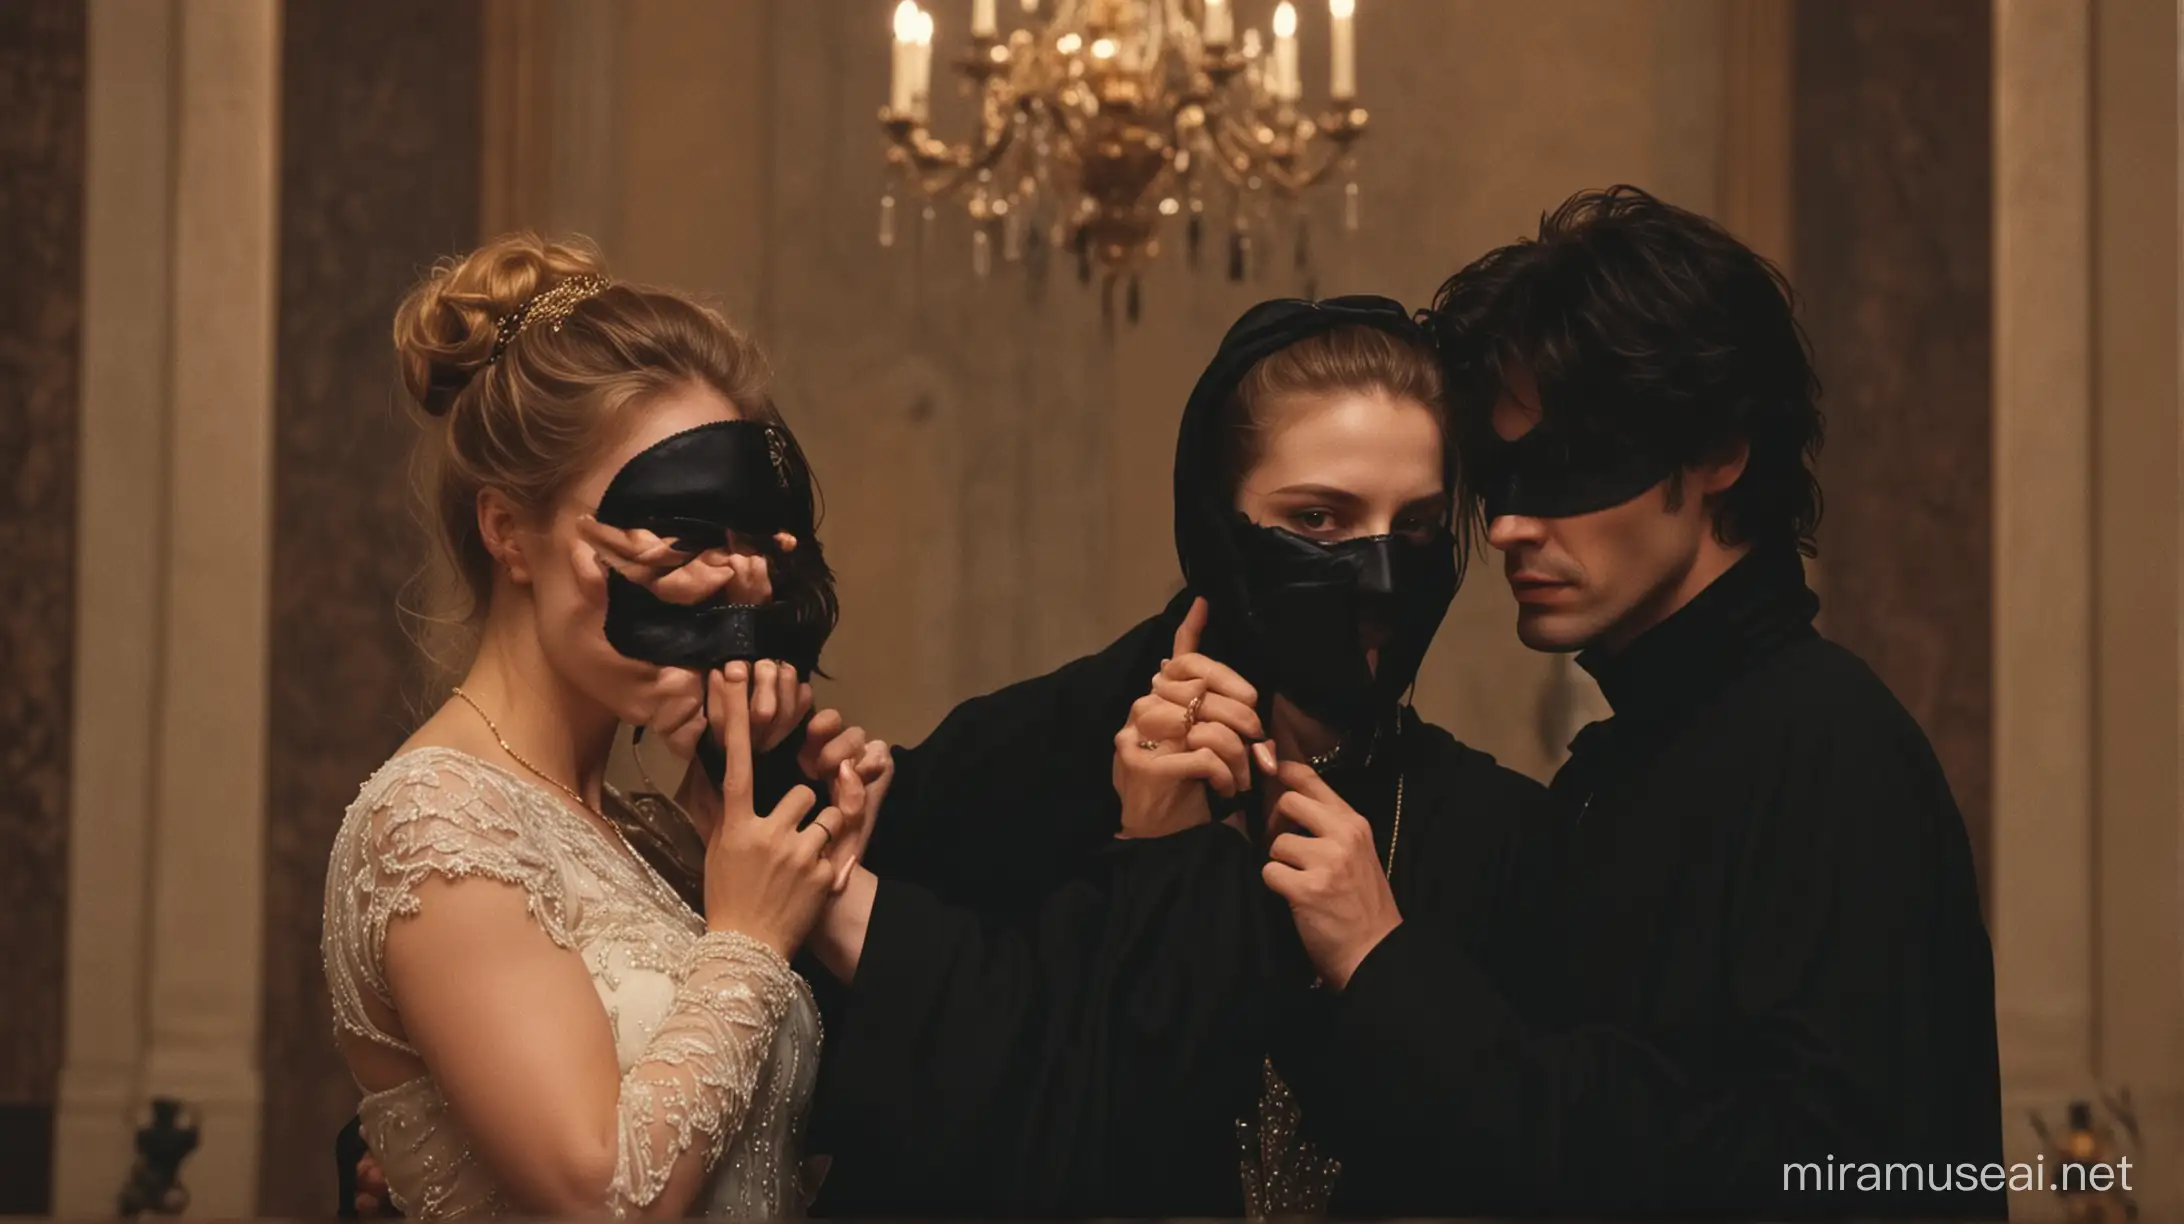 Tender Holding in Secret and evil ceremony . Dark them like the movie eyes wide shut. Make it more exciting.  